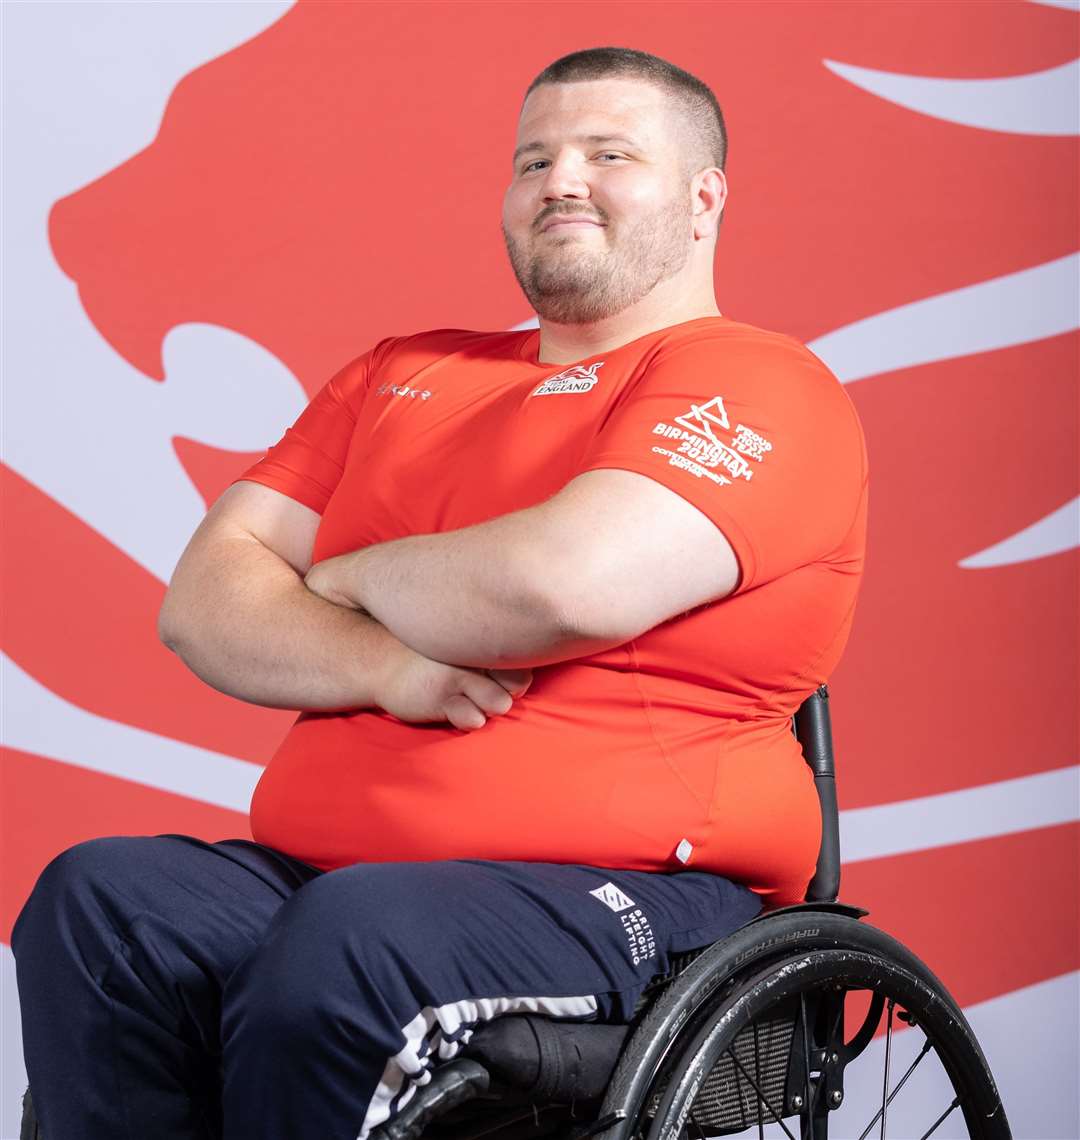 Liam McGarry selected to represent Team England at Para Powerlifting at the 2022 Commonwealth Games in Birmingham. Photo Credit: Sam Mellish / Team England.